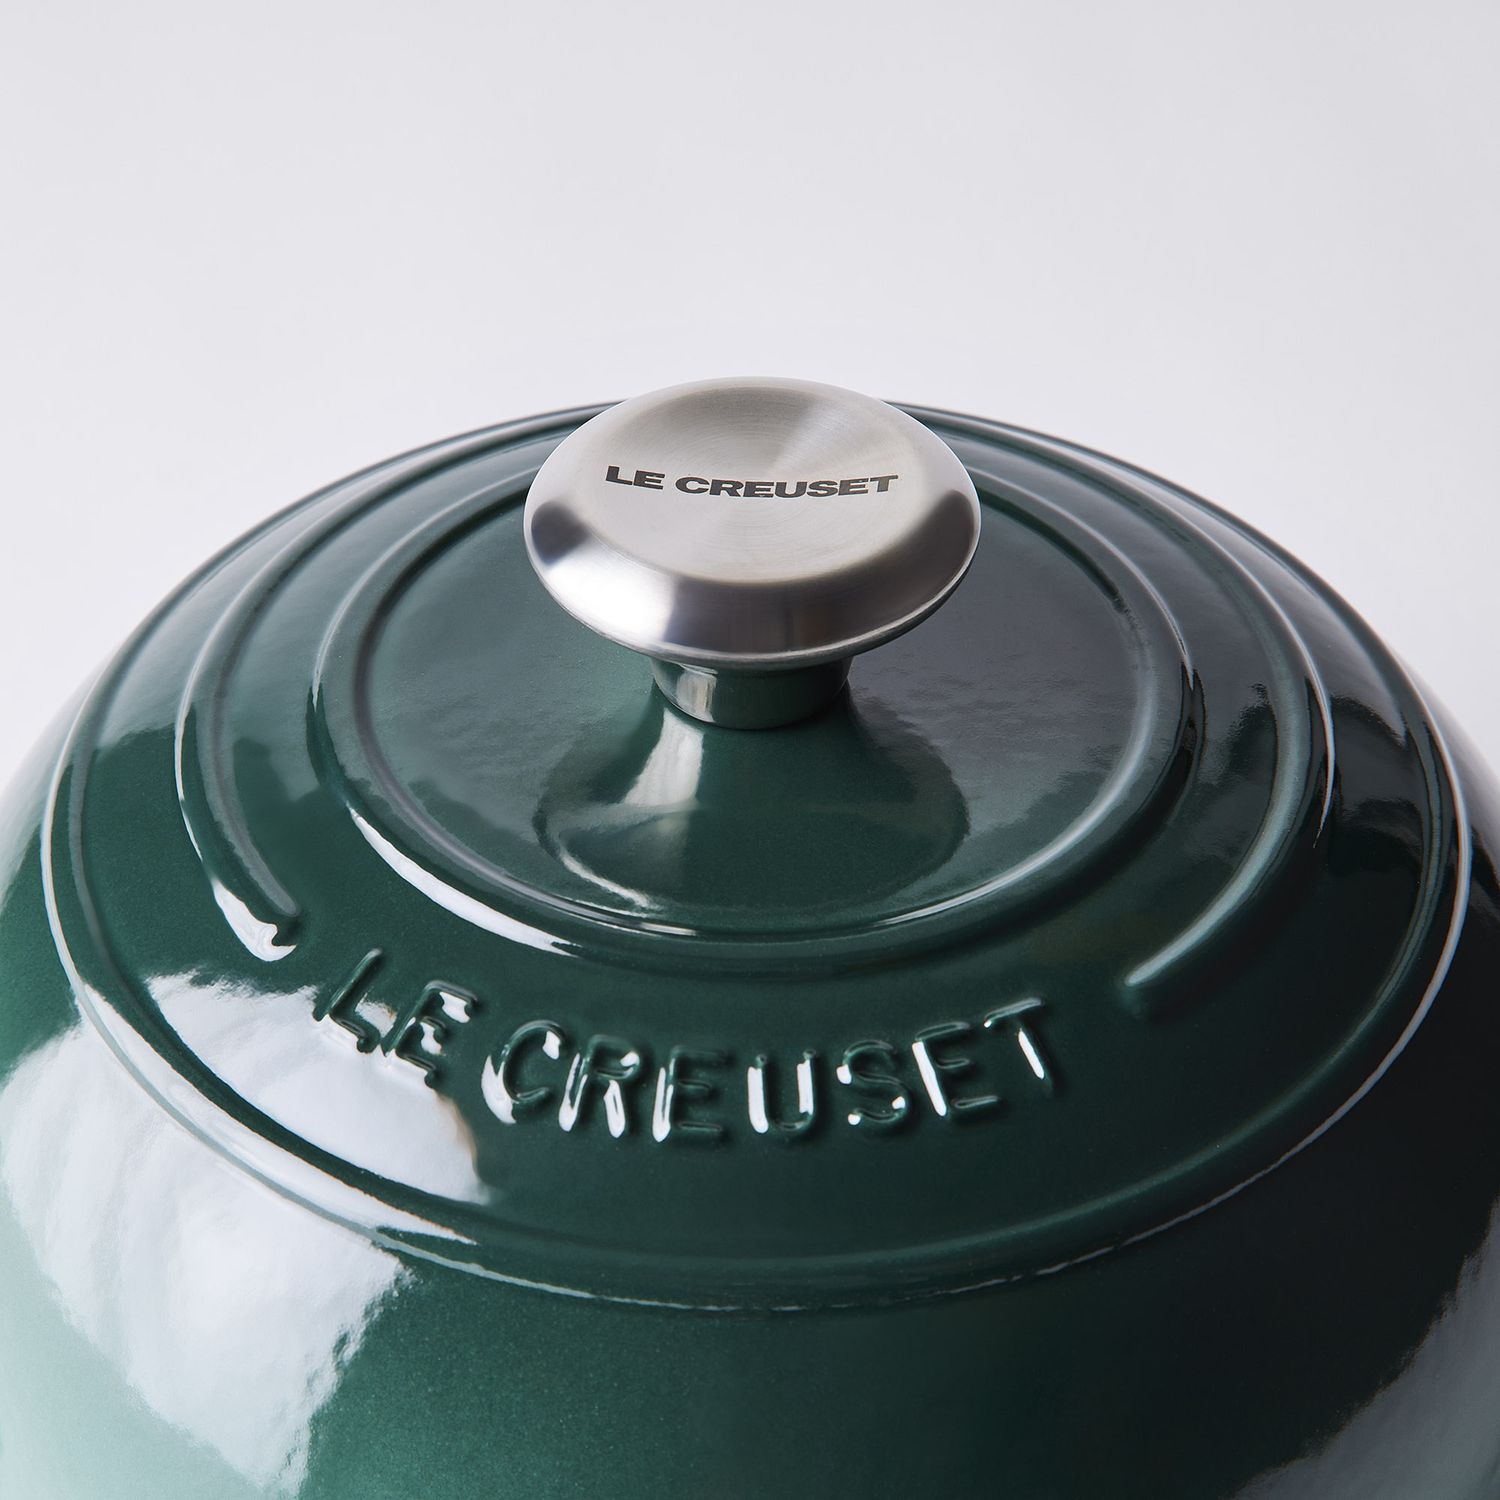 Introducing the Le Creuset Bread Oven 